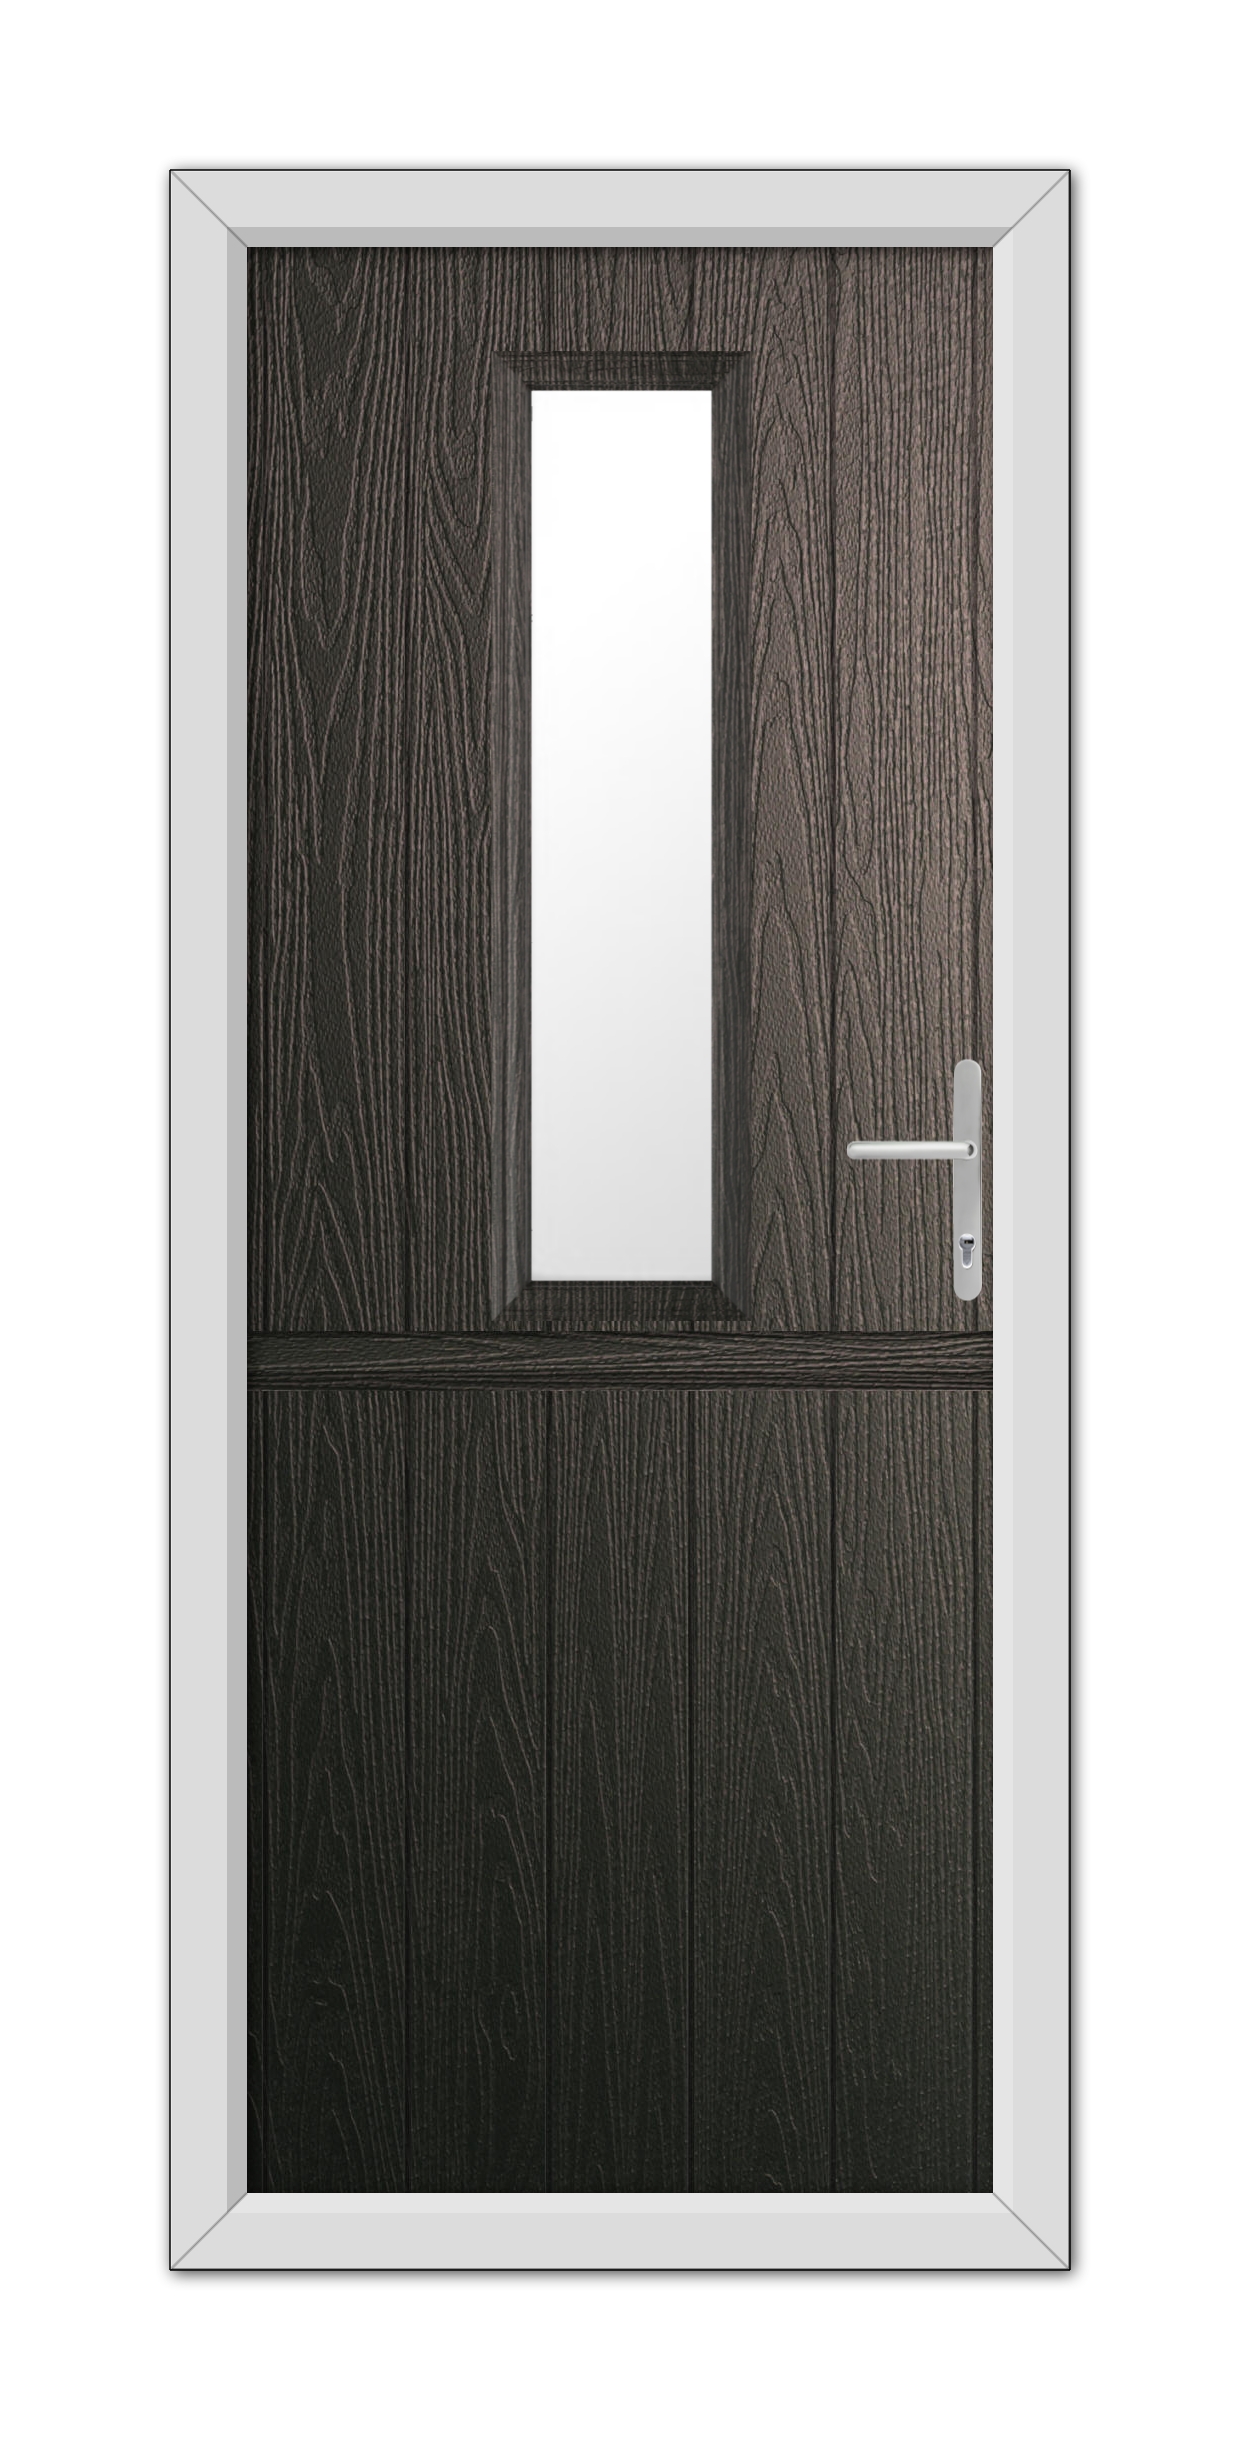 A modern Schwarzbraun Mowbray Stable composite door with a rectangular window at the top and a metallic handle on the right, set within a white frame.